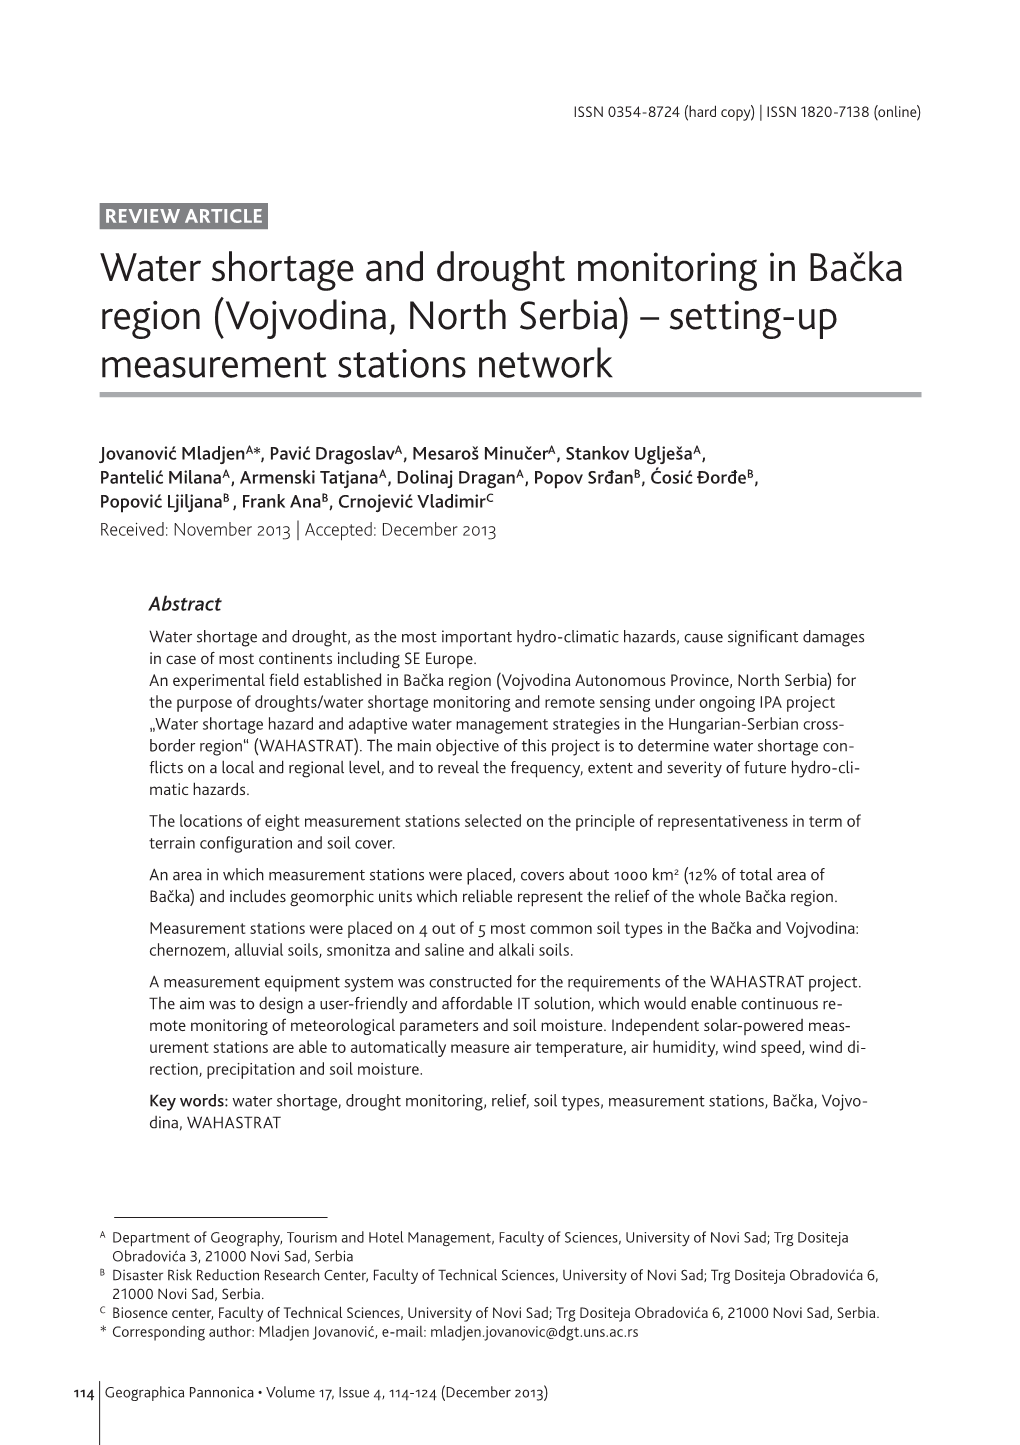 Water Shortage and Drought Monitoring in Bačka Region (Vojvodina, North Serbia) – Setting-Up Measurement Stations Network